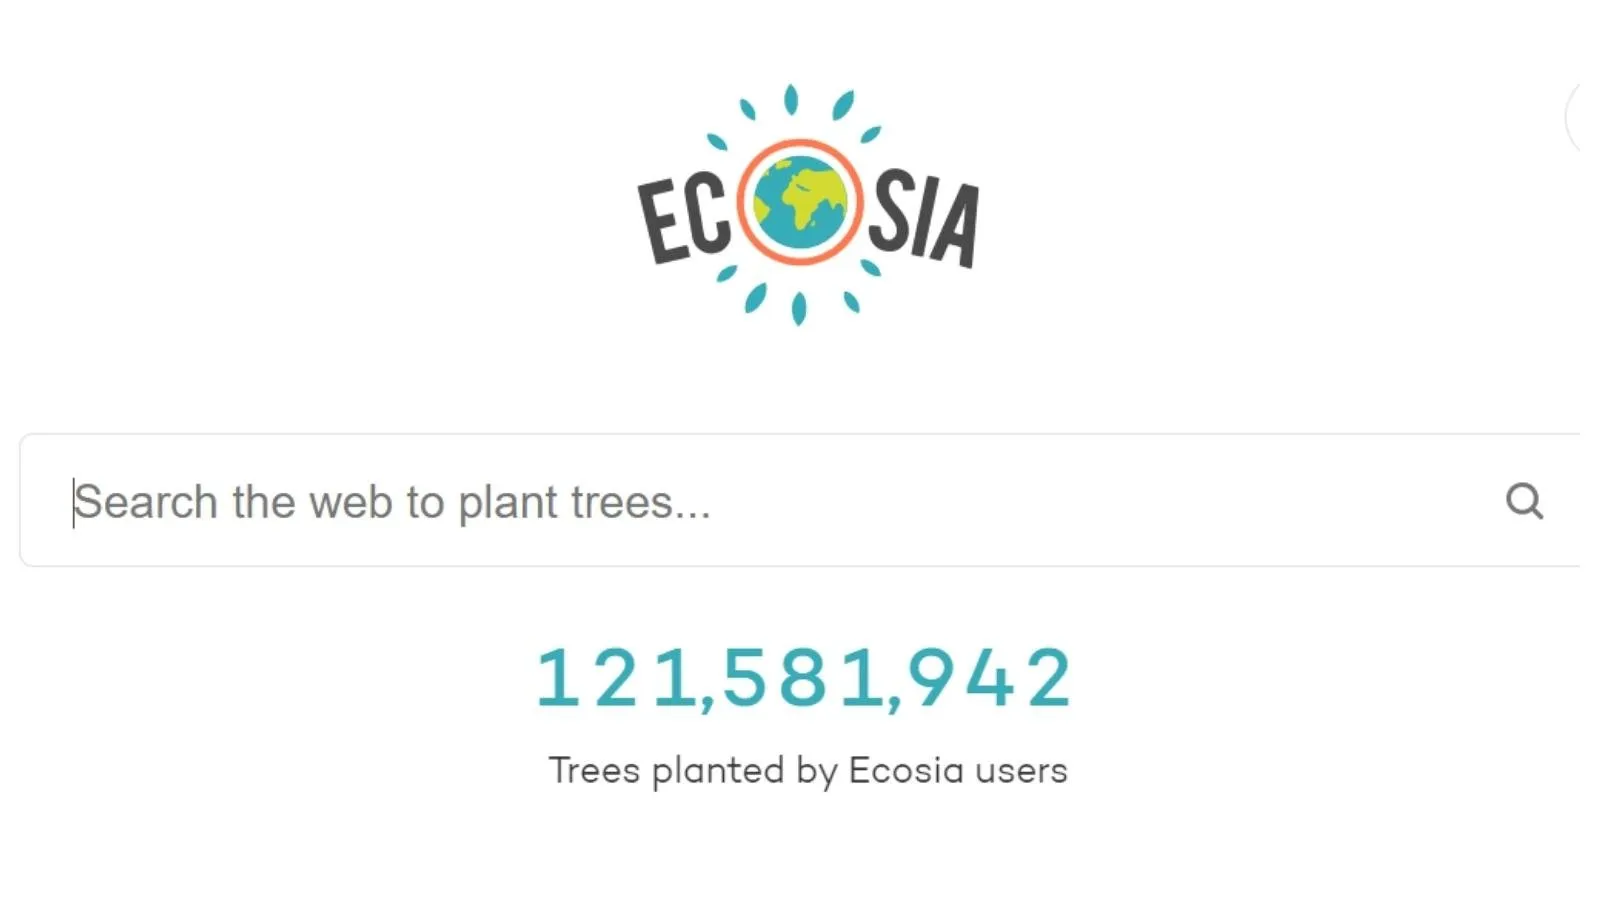 ecosia save the planet with search